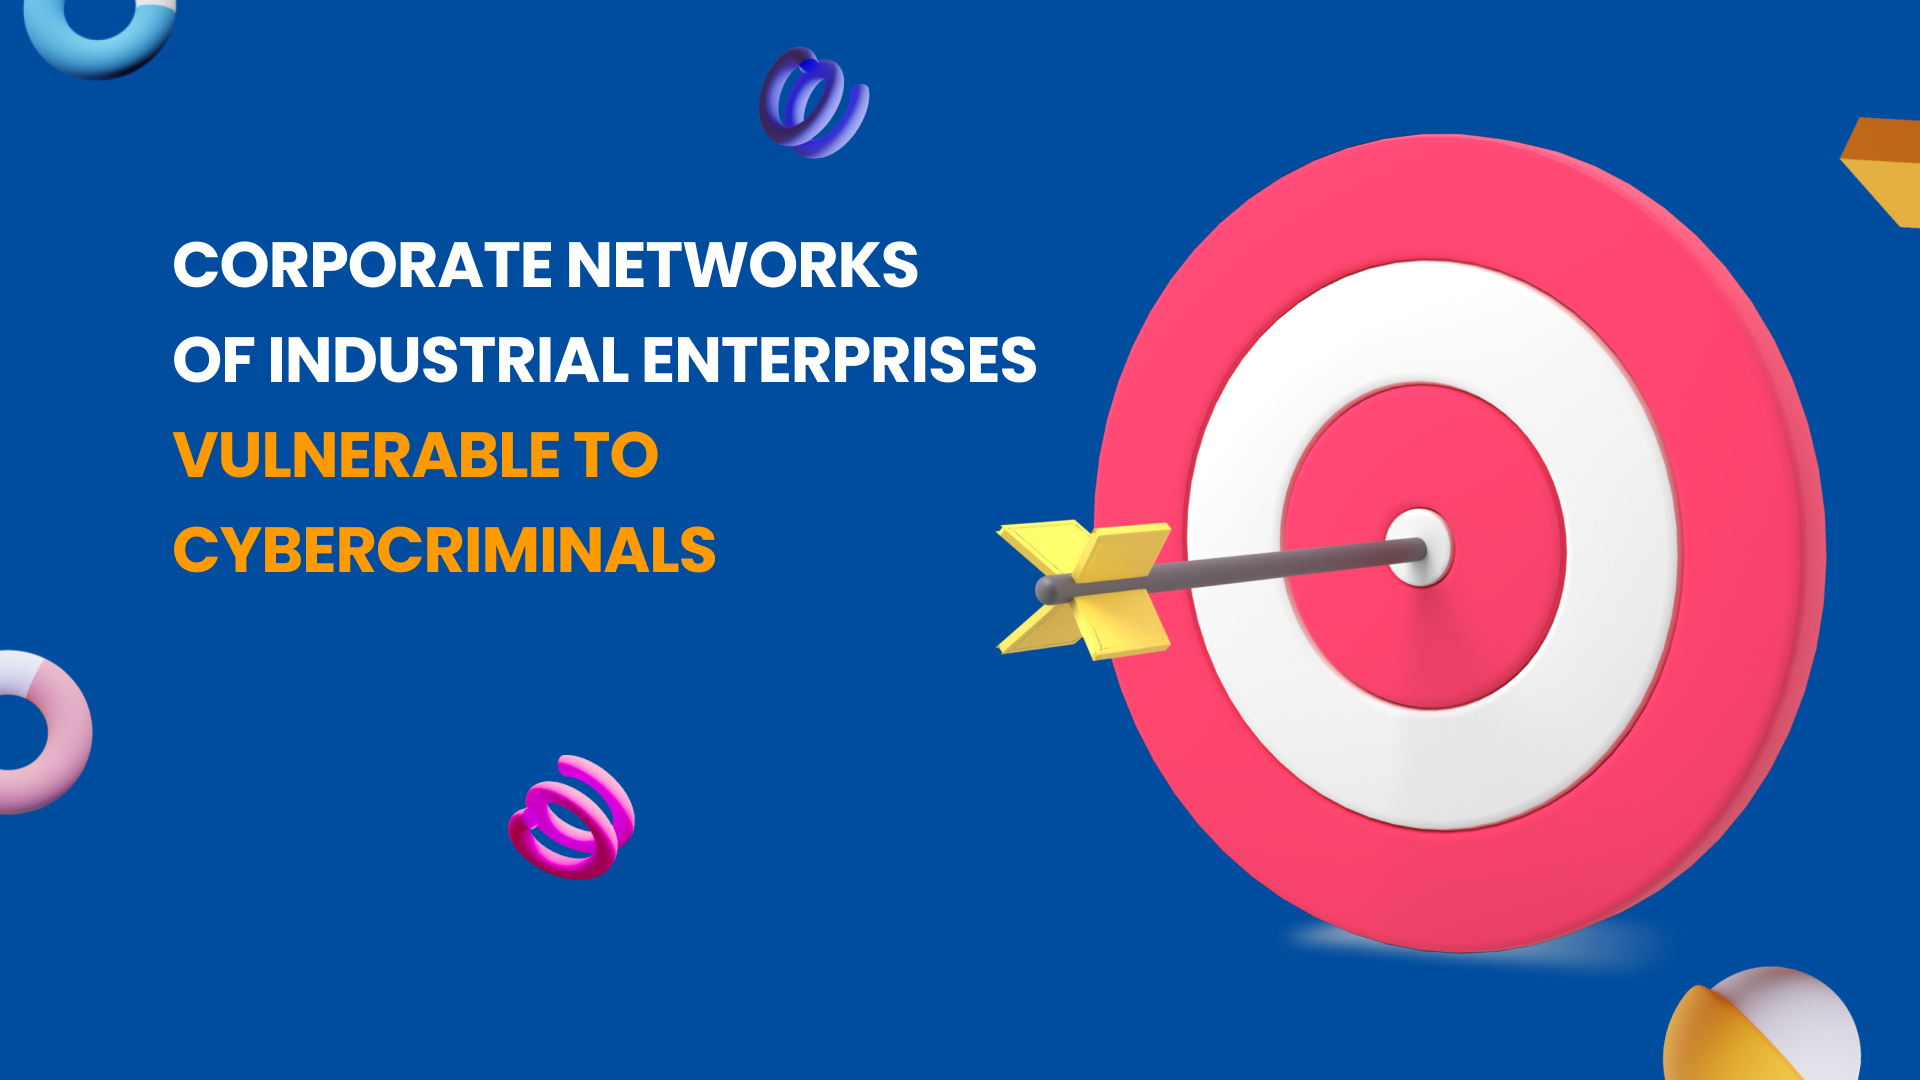 Corporate Networks of Industrial Enterprises Vulnerable to Cybercriminals